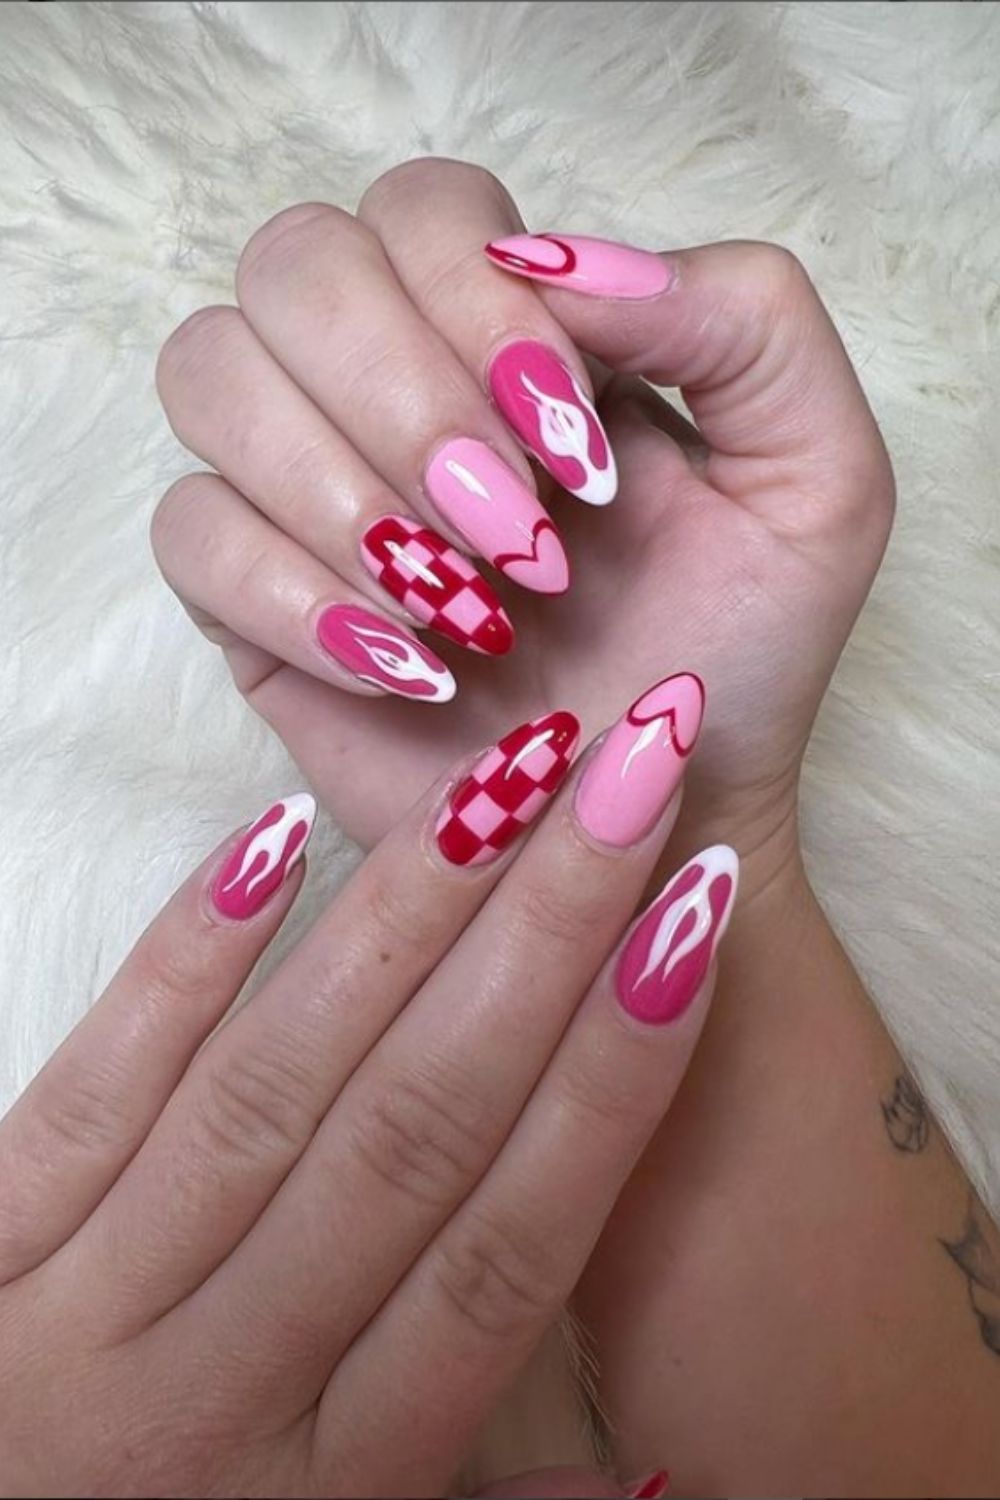 Cute pink and red almond nails designs